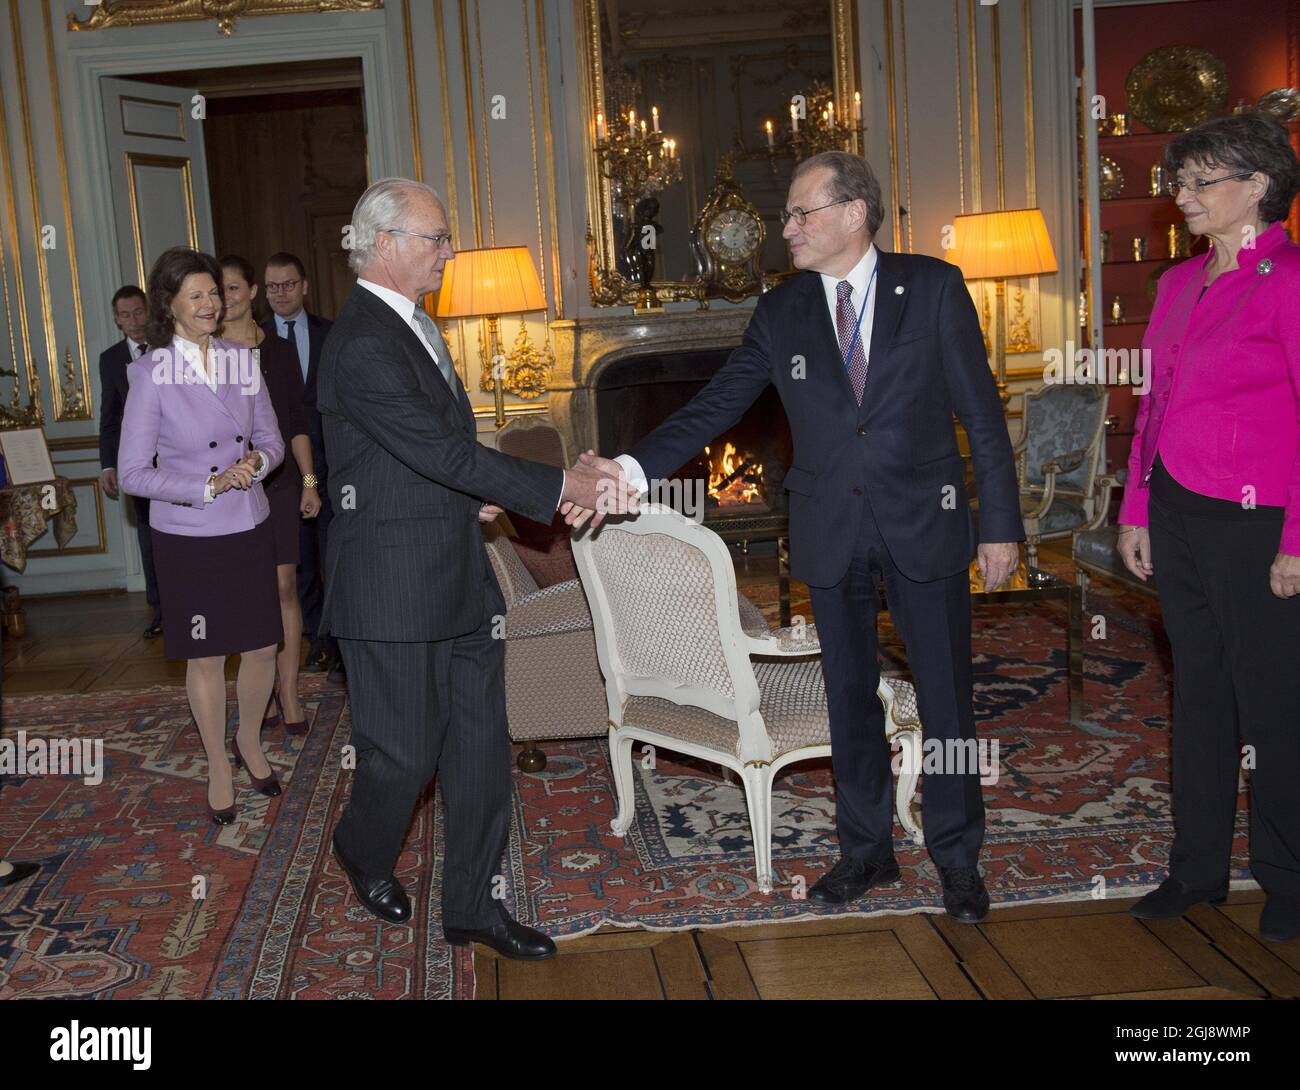 STOCKHOLM 20141118 King Carl Gustaf and Queen Silvia greets the former Speaker of the Riksdag, Per Westerberg and first Deputy Susanne Eberstein before a lunch at the Royal Palace in Stockholm. Foto: Fredrik Sandberg / TT / Kod 10080  Stock Photo